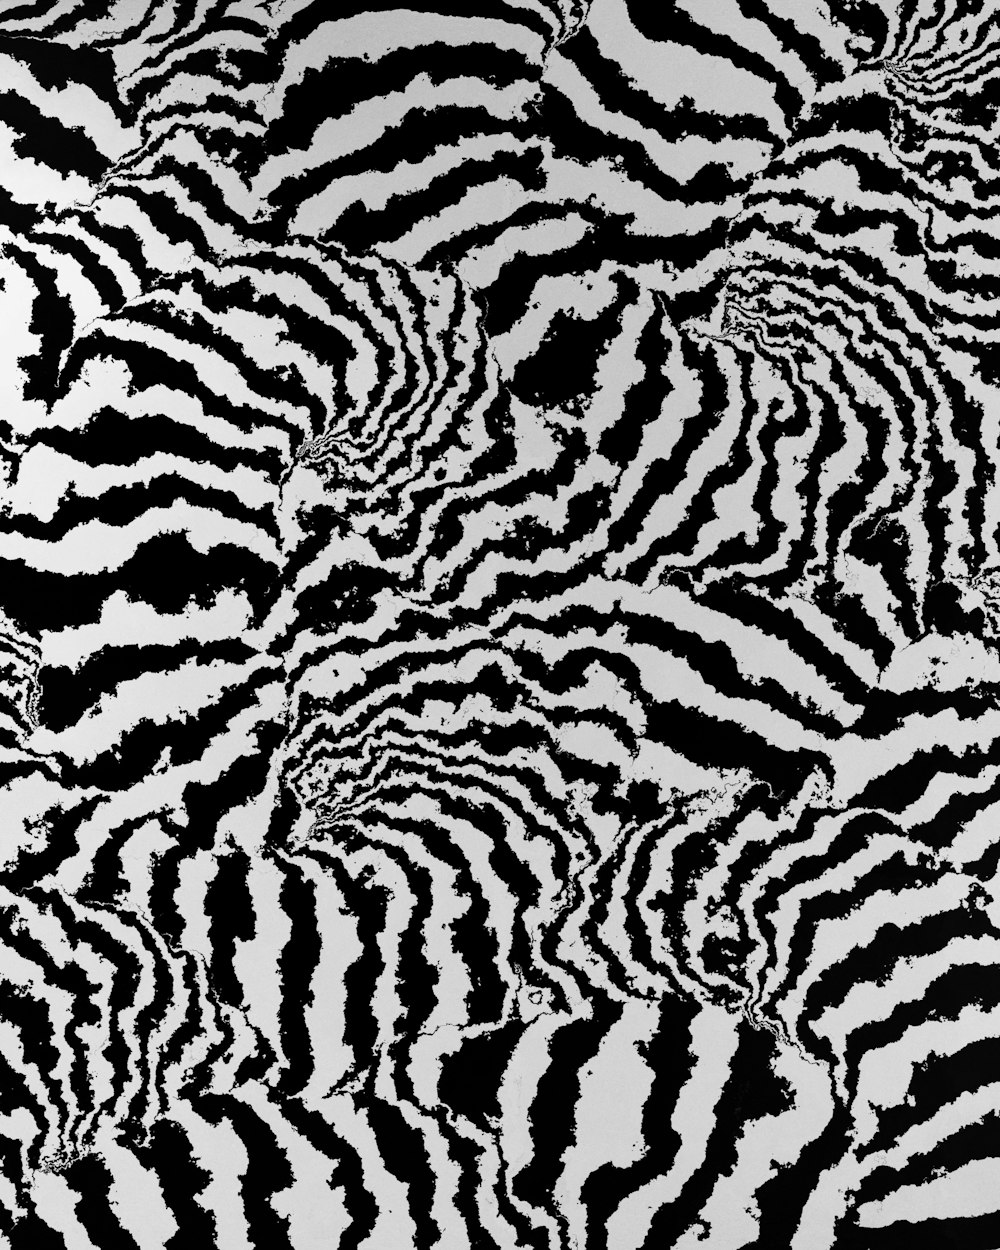 a black and white image of a black and white textured surface